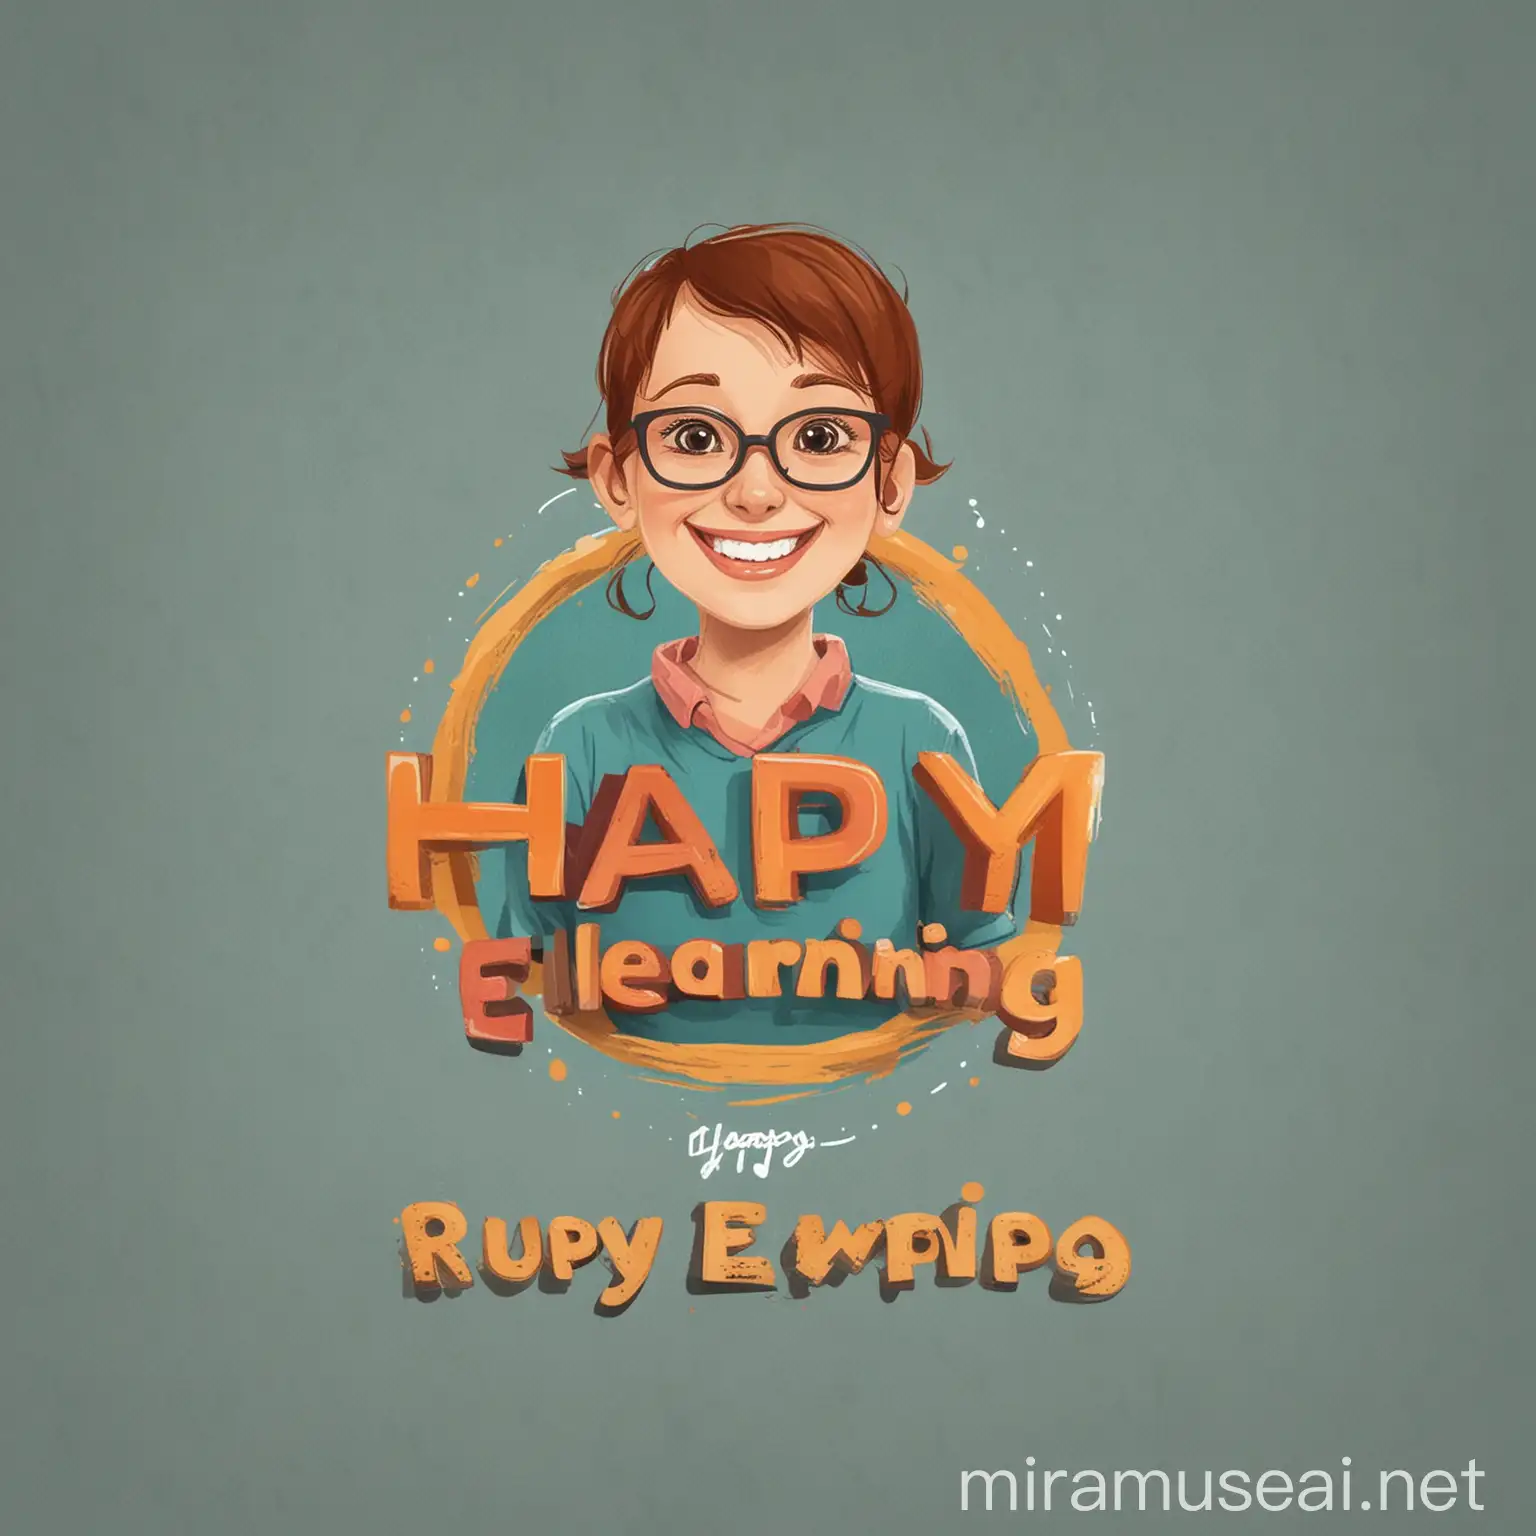 create a logo with name of Happy E-learning